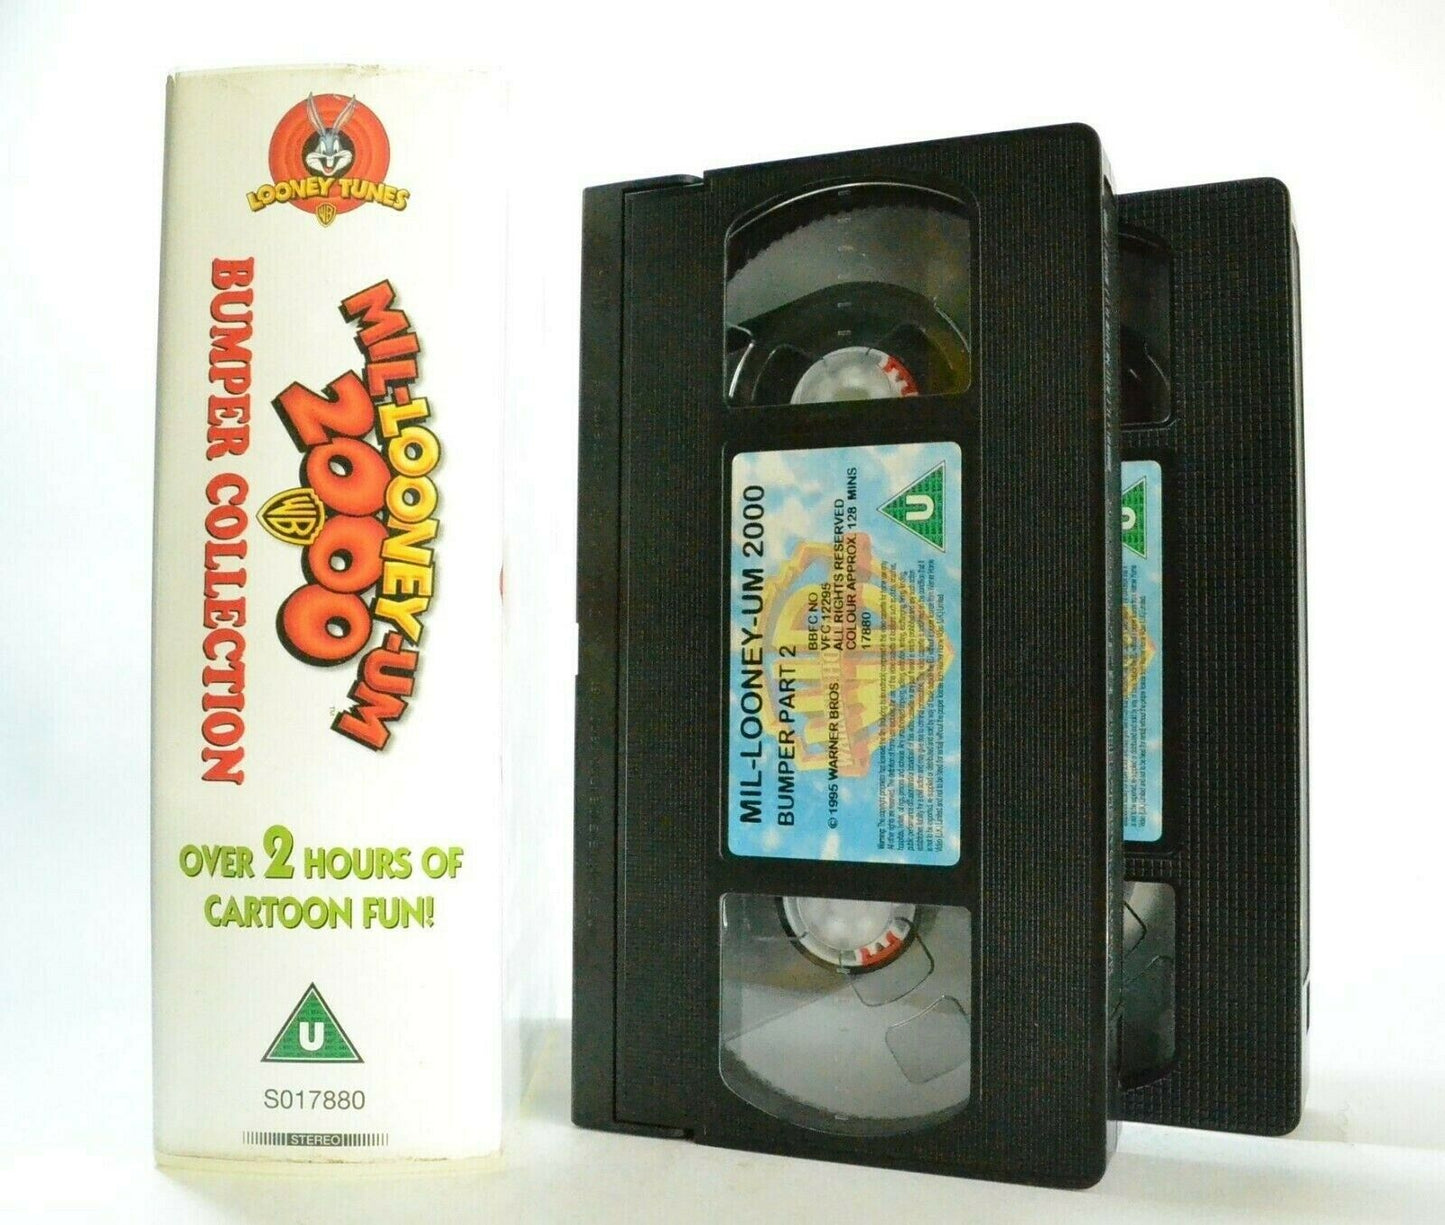 Mil-Looney-Um 2000: Bumper Collection - Looney Tunes - Animated - Kids - Pal VHS-